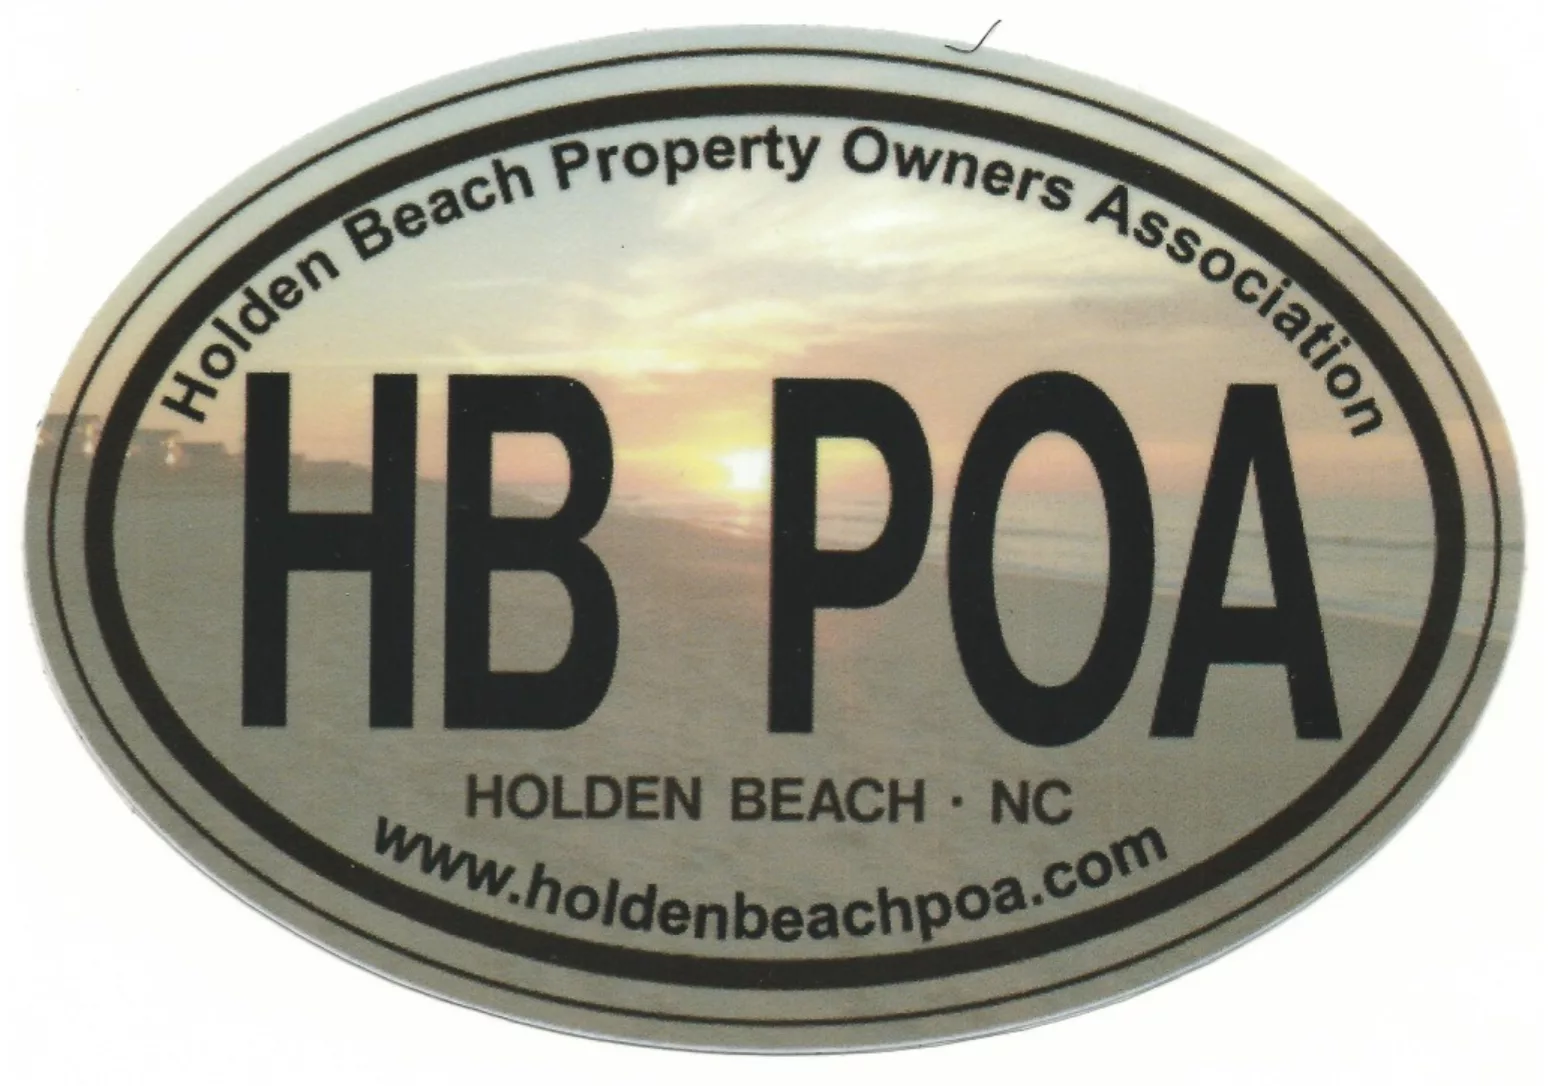 Holden Beach Property Owners Association